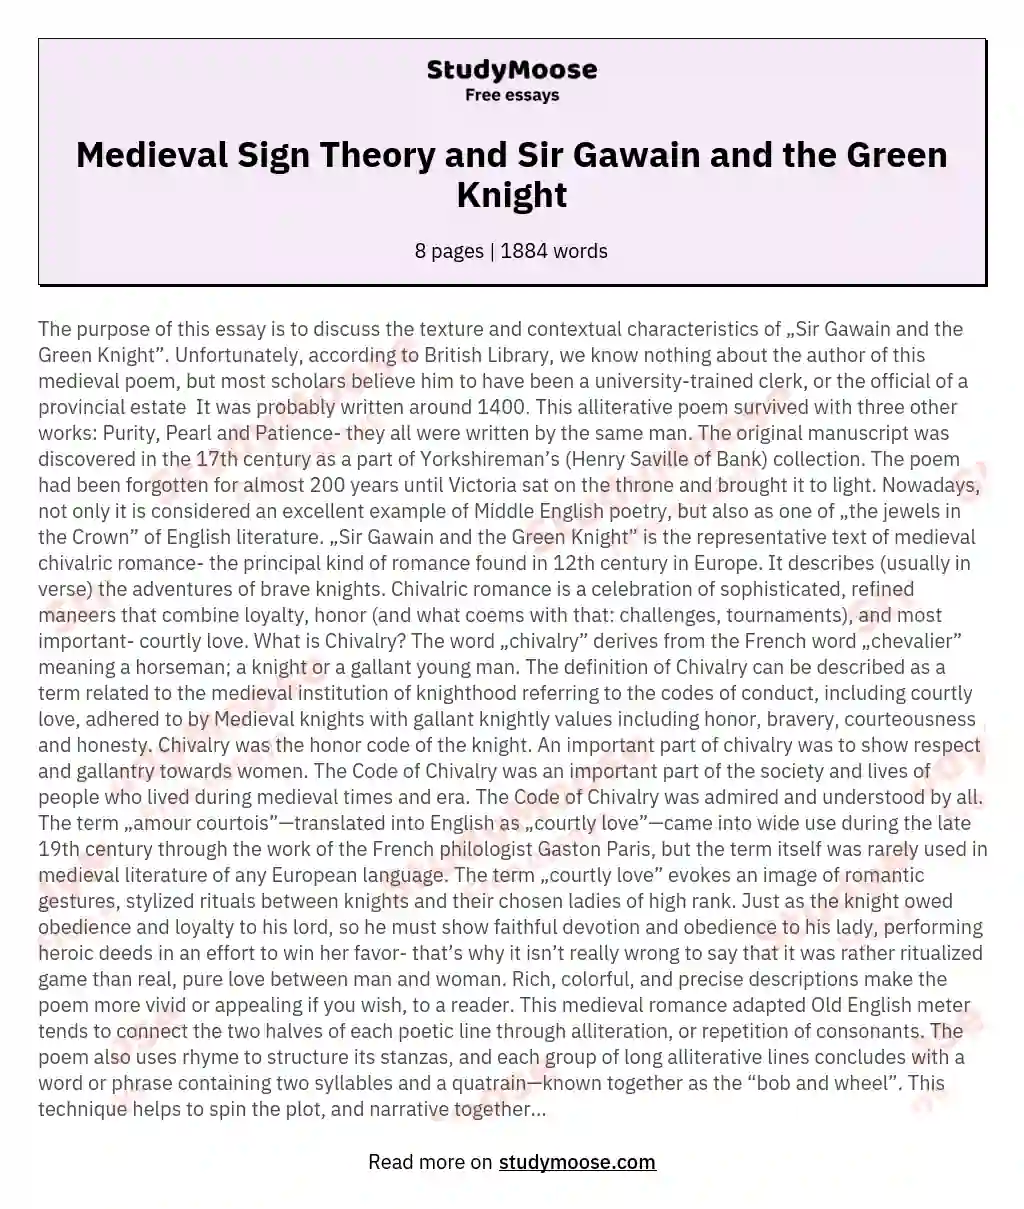 Medieval Sign Theory and Sir Gawain and the Green Knight